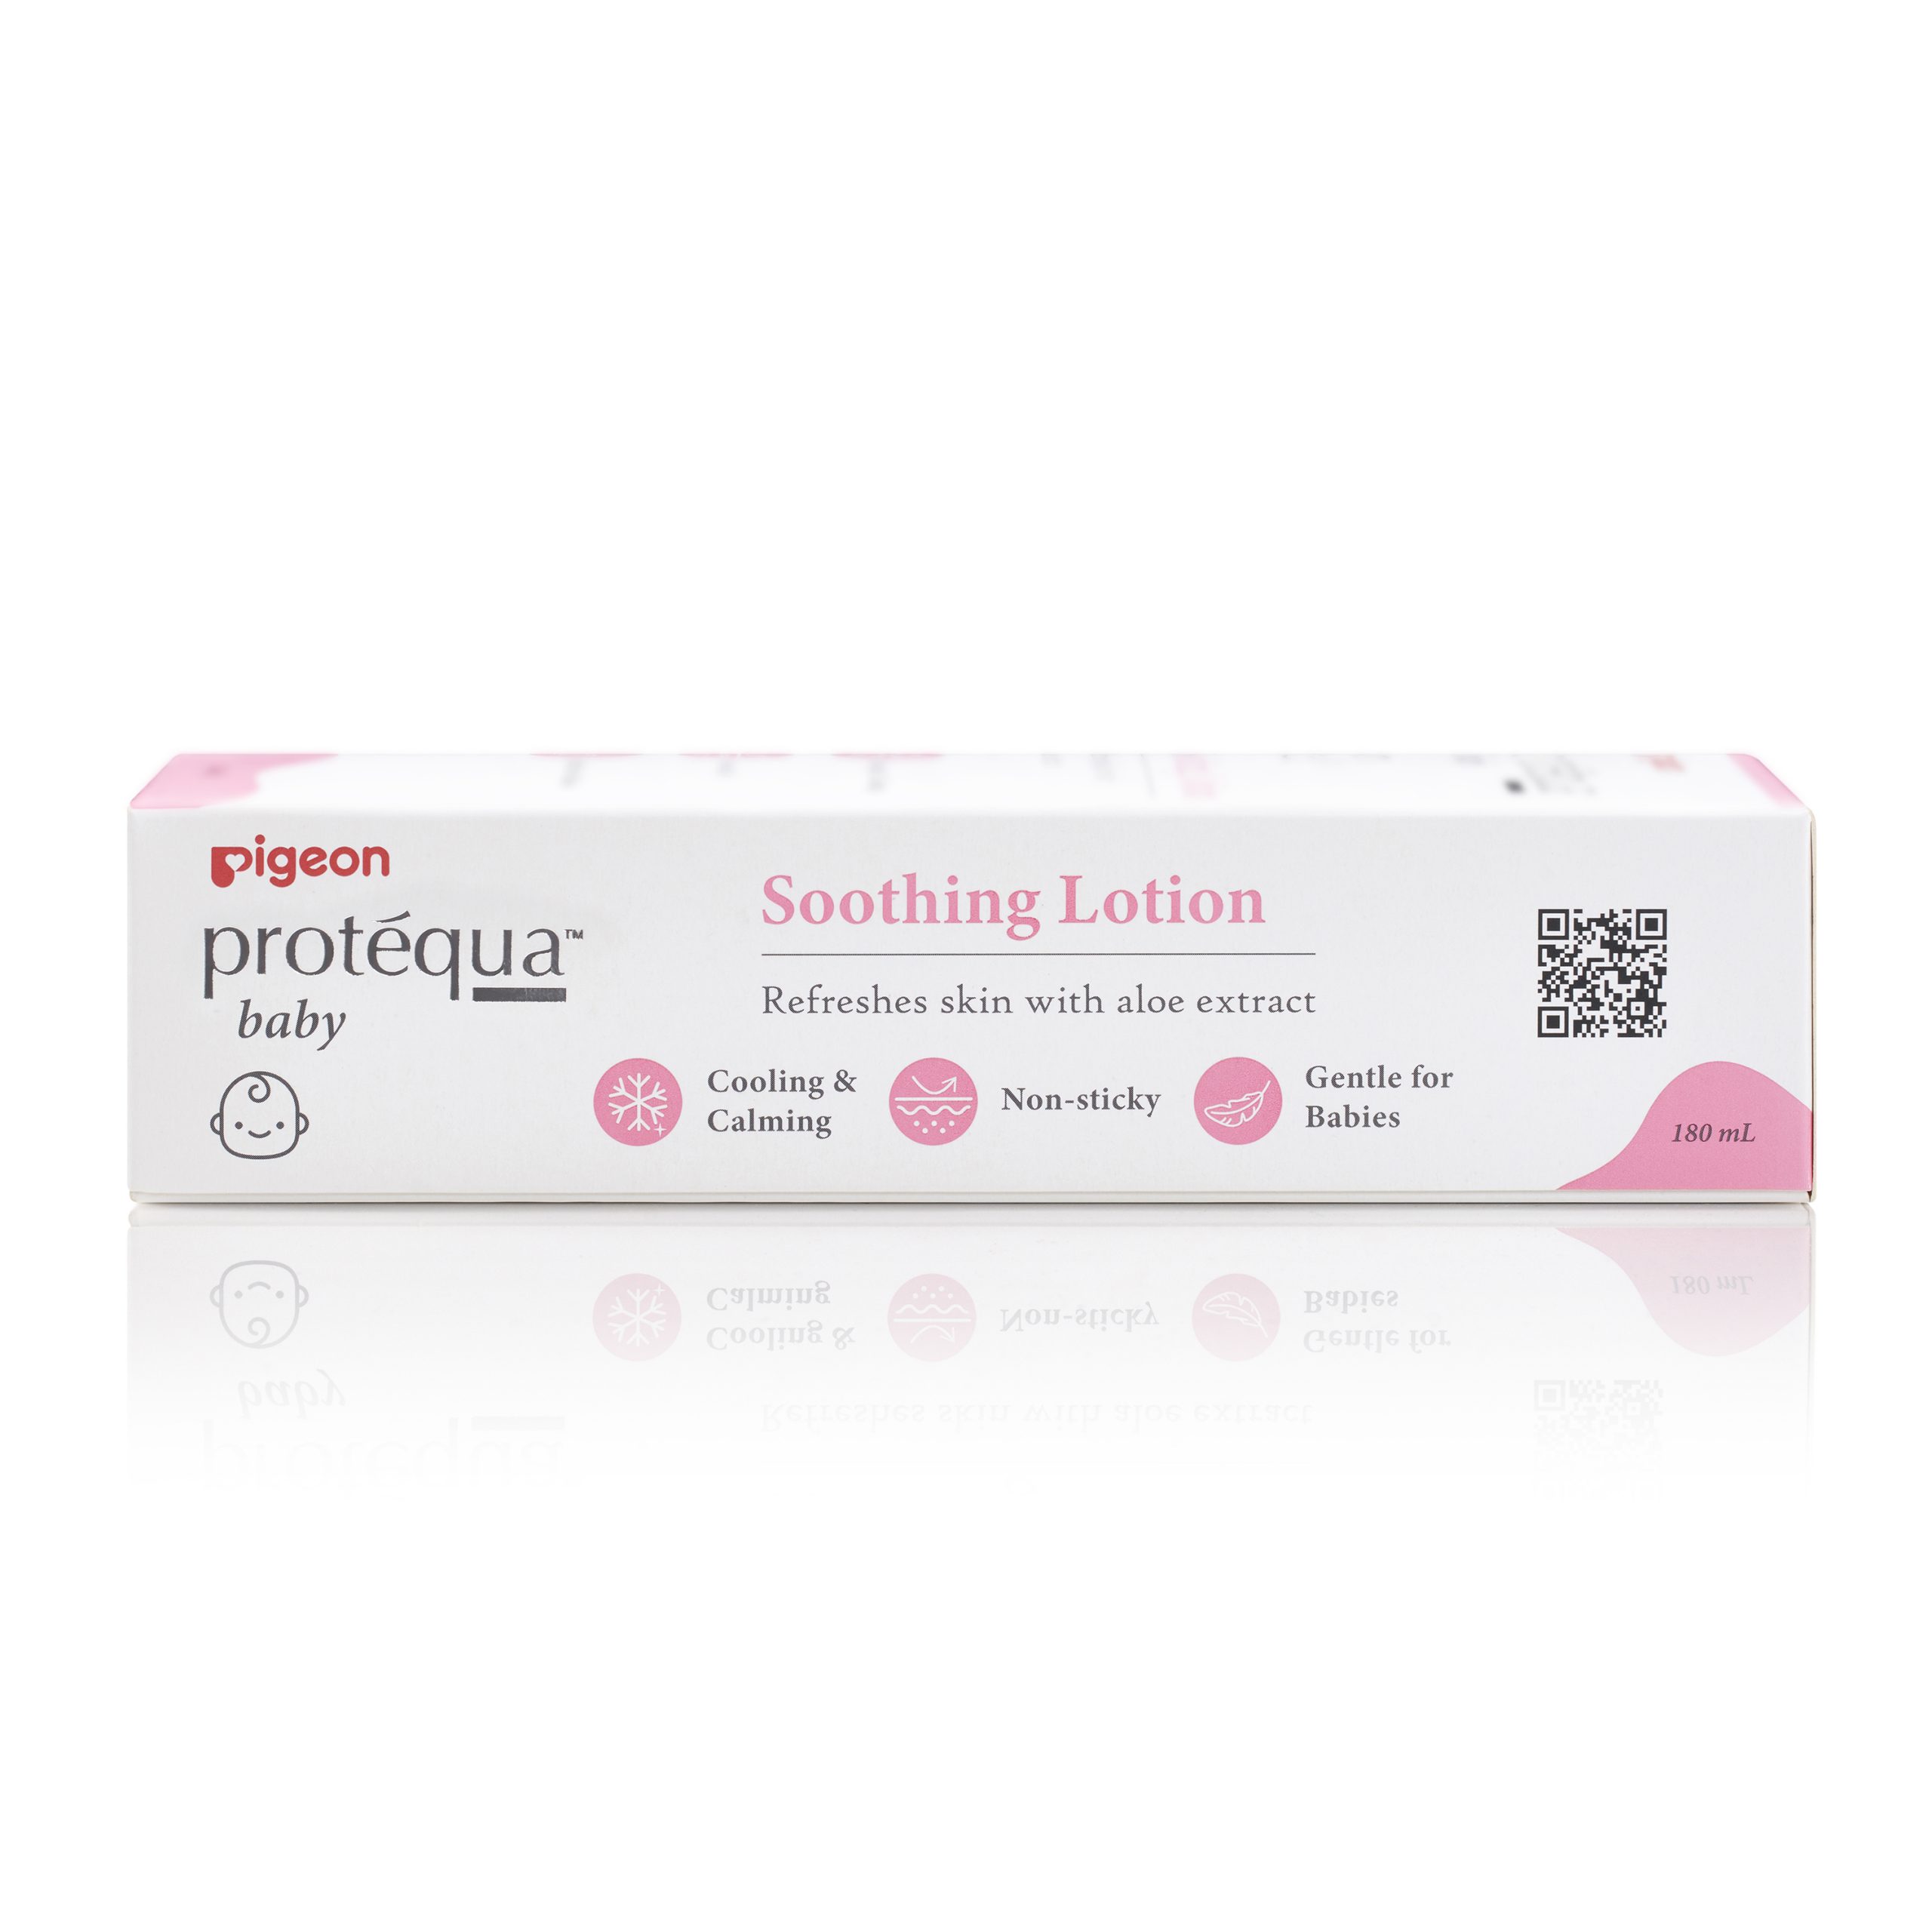 Pigeon Protequa Soothing Lotion (PG-78373-1)